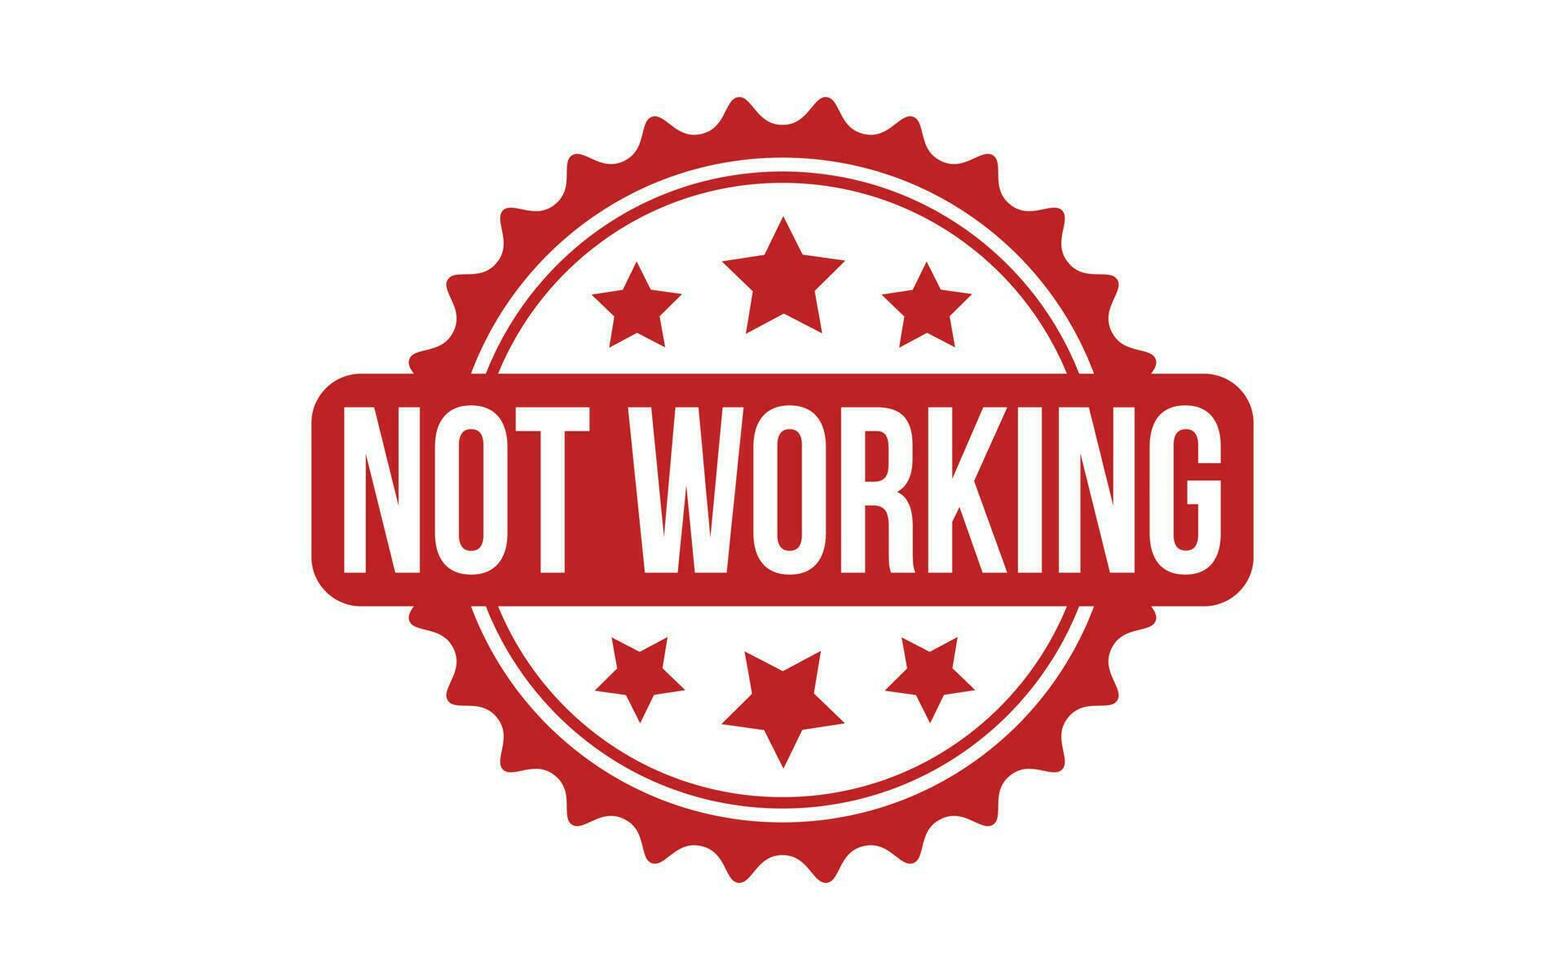 Not Working Rubber Stamp Seal Vector